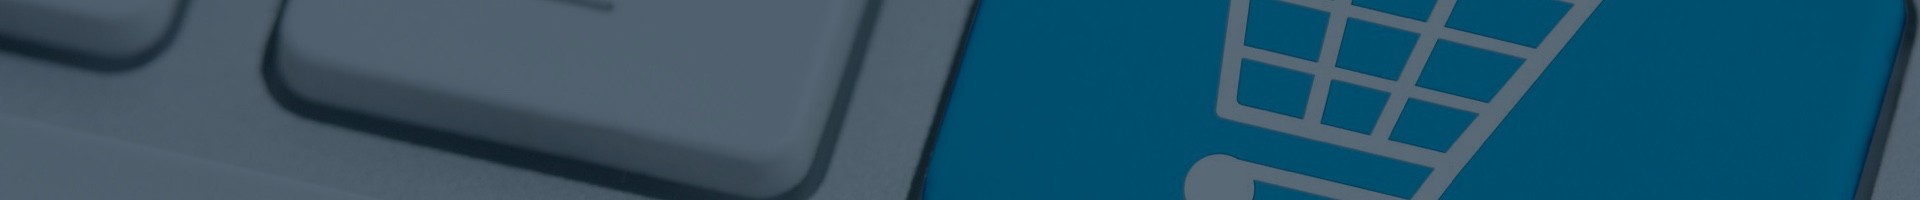 banner orce